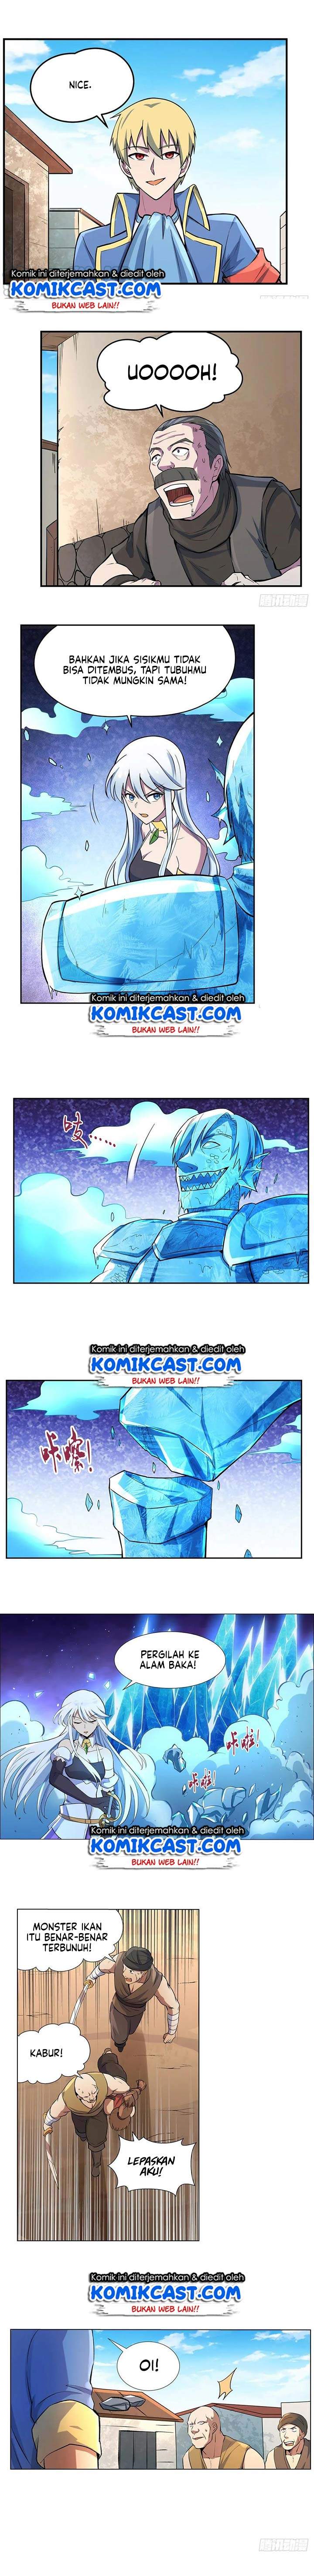 The Demon King Who Lost His Job Chapter 108 Bahasa Indonesia